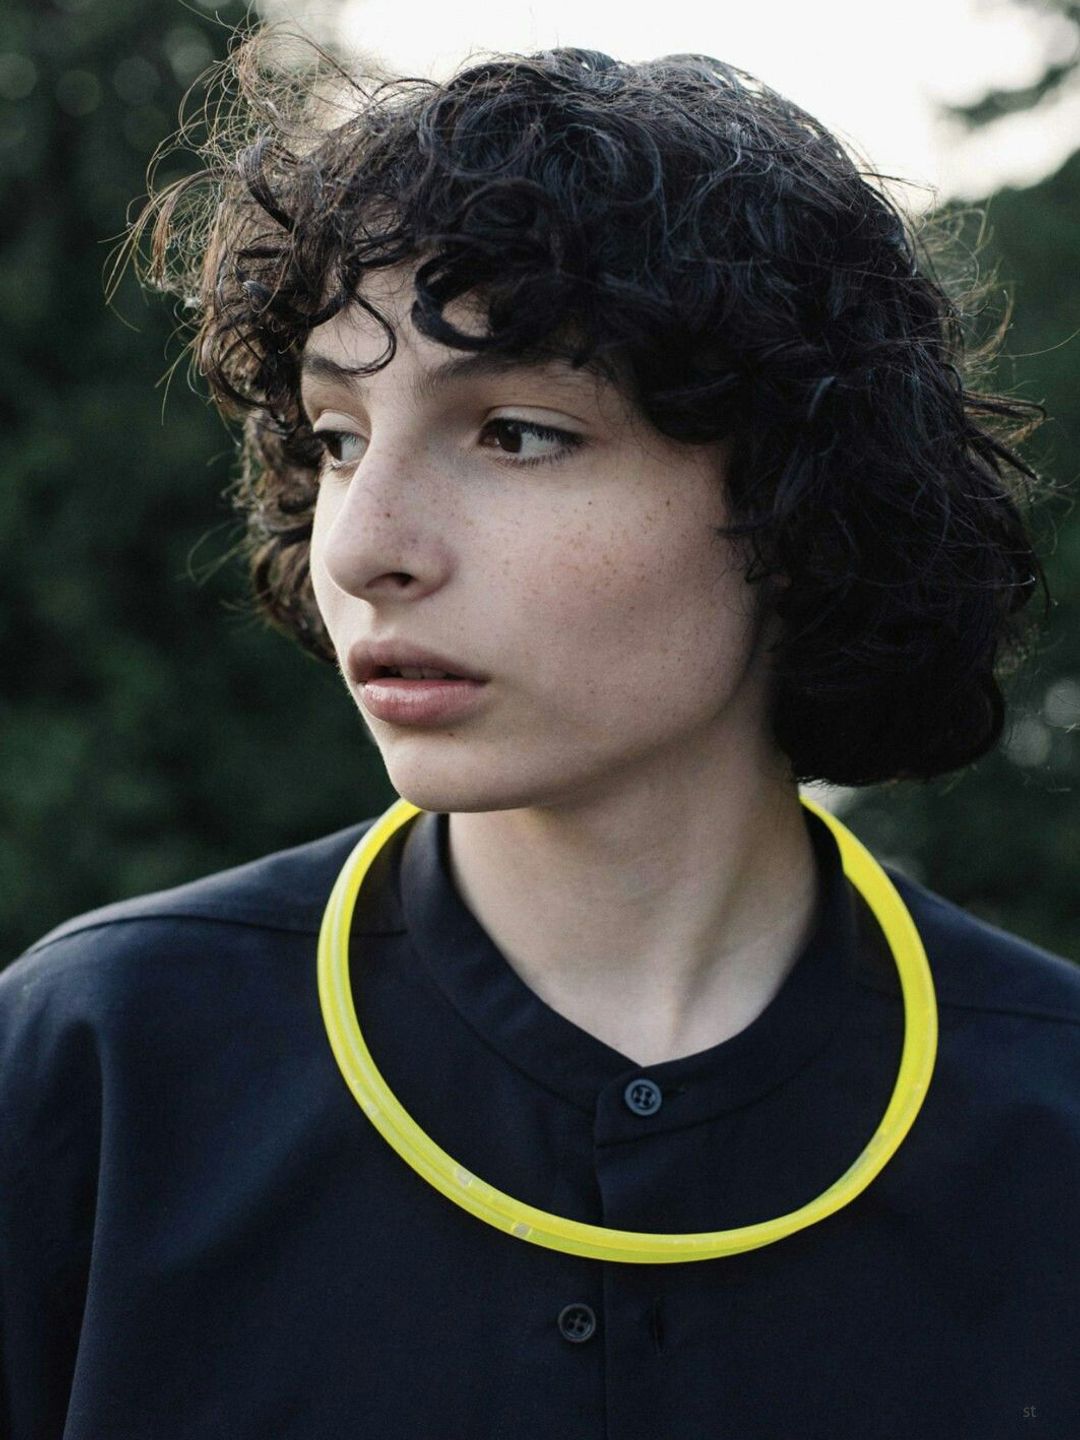 Finn Wolfhard in his youth